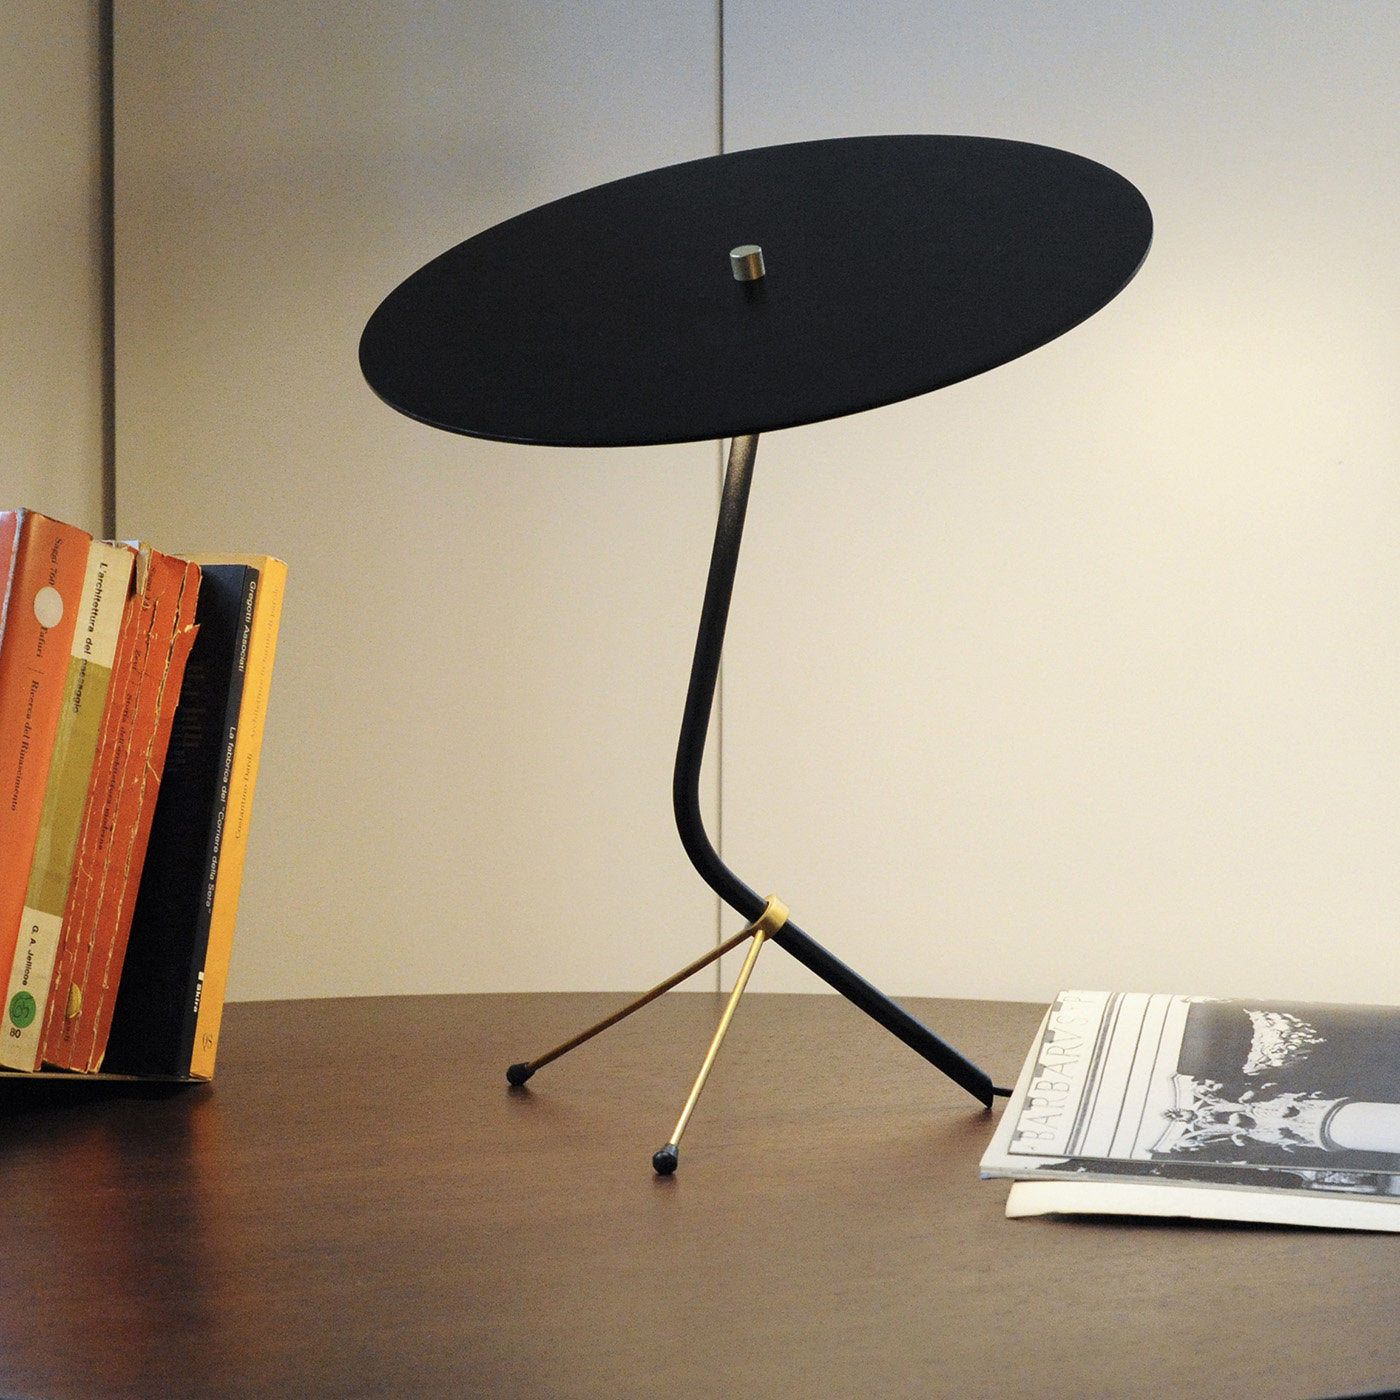 PLT01 Black and White Table Lamp - Alternative view 1